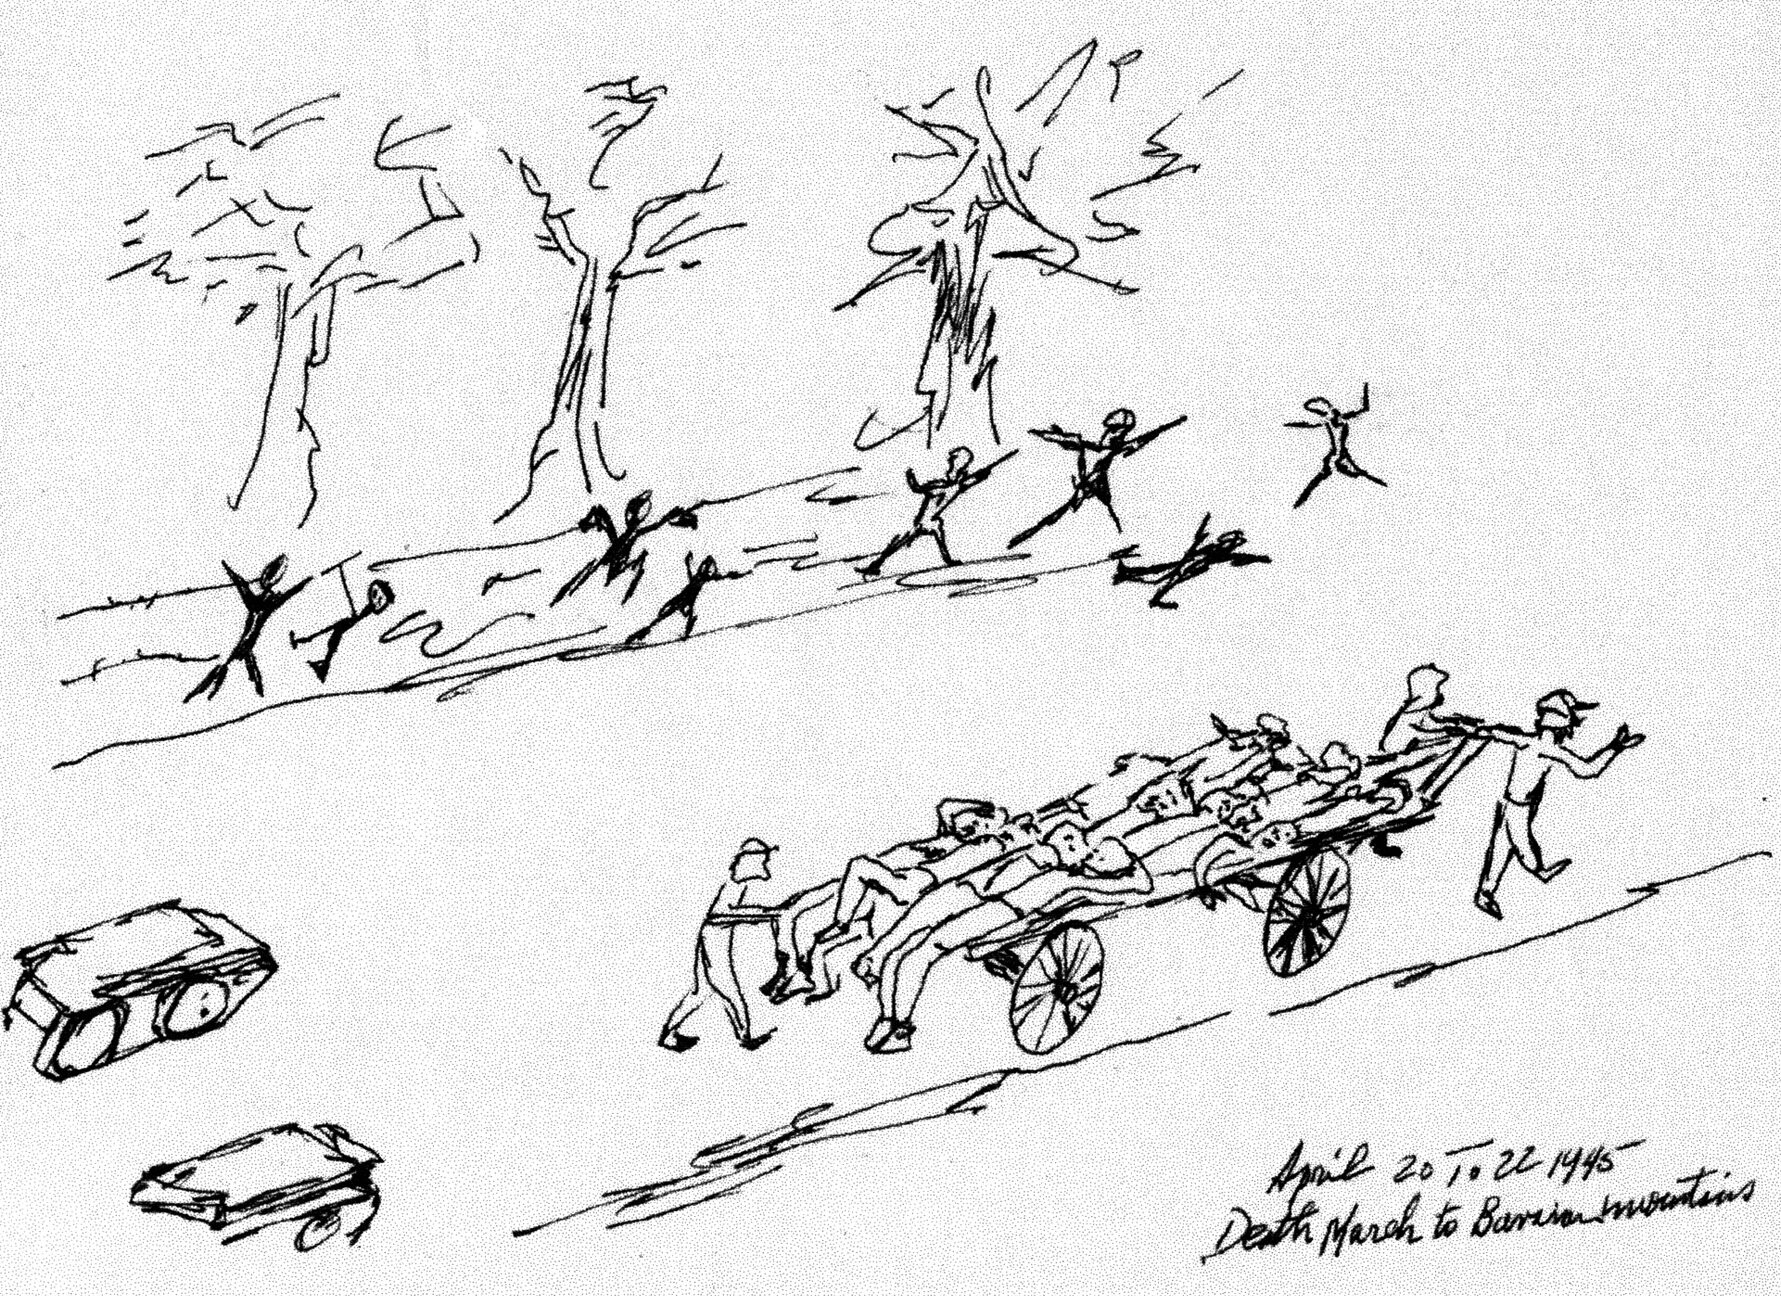 POW Tony Acevedo’s sketch based on his memories of the death march shows sick POWs on a wagon, dead ones in a ditch.